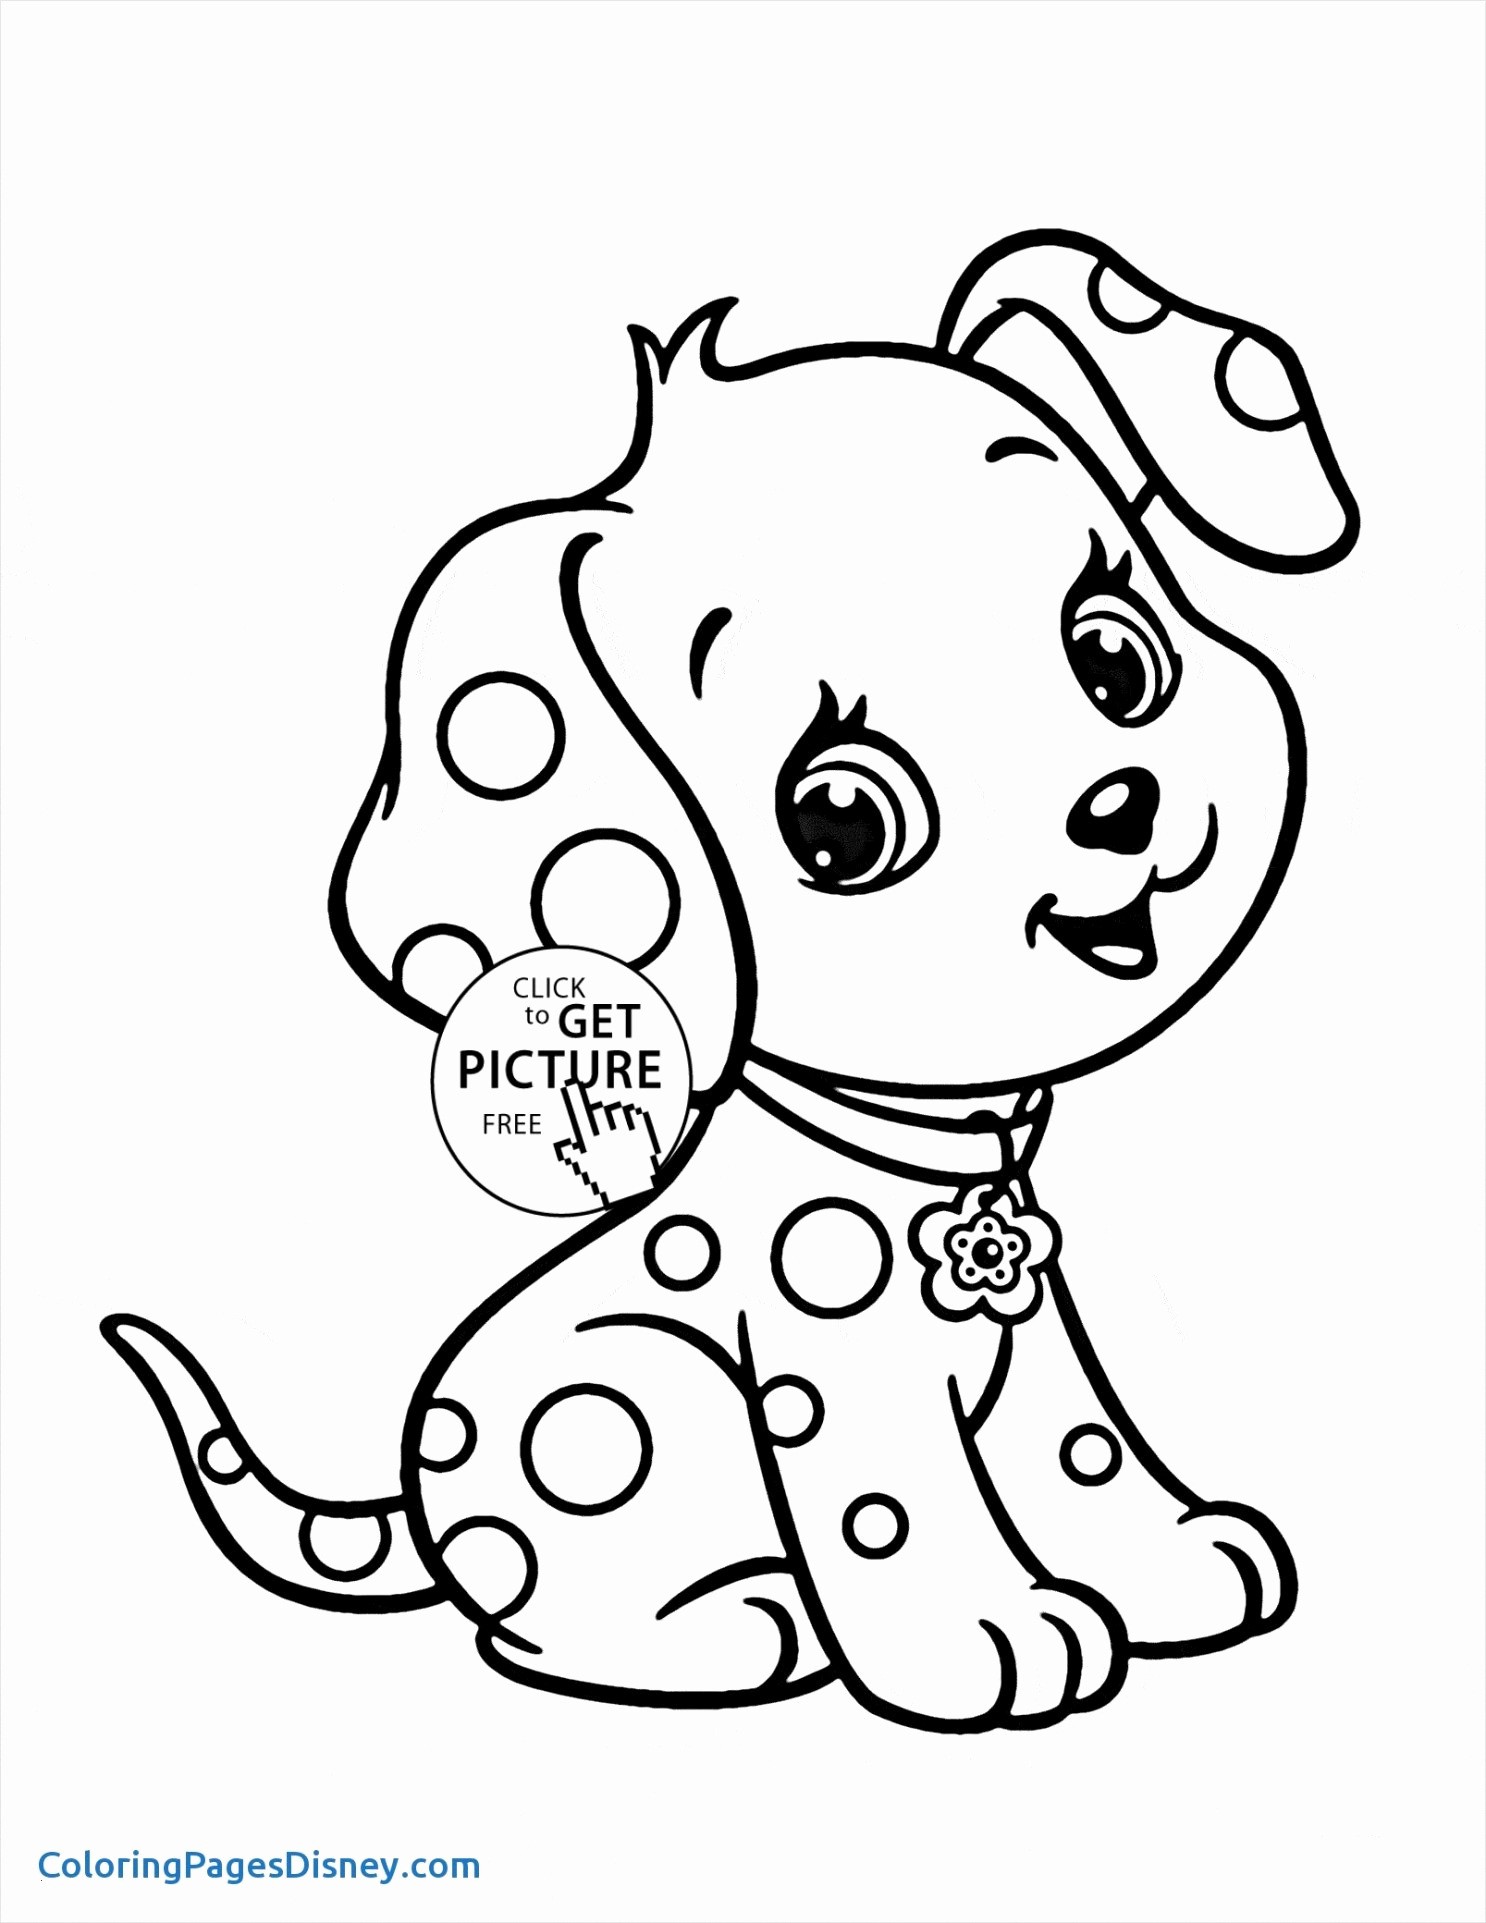 Coloring Page for Kids Beautiful Coloring Pages Dogs New Printable Cds 0d Coloring Pages Disney